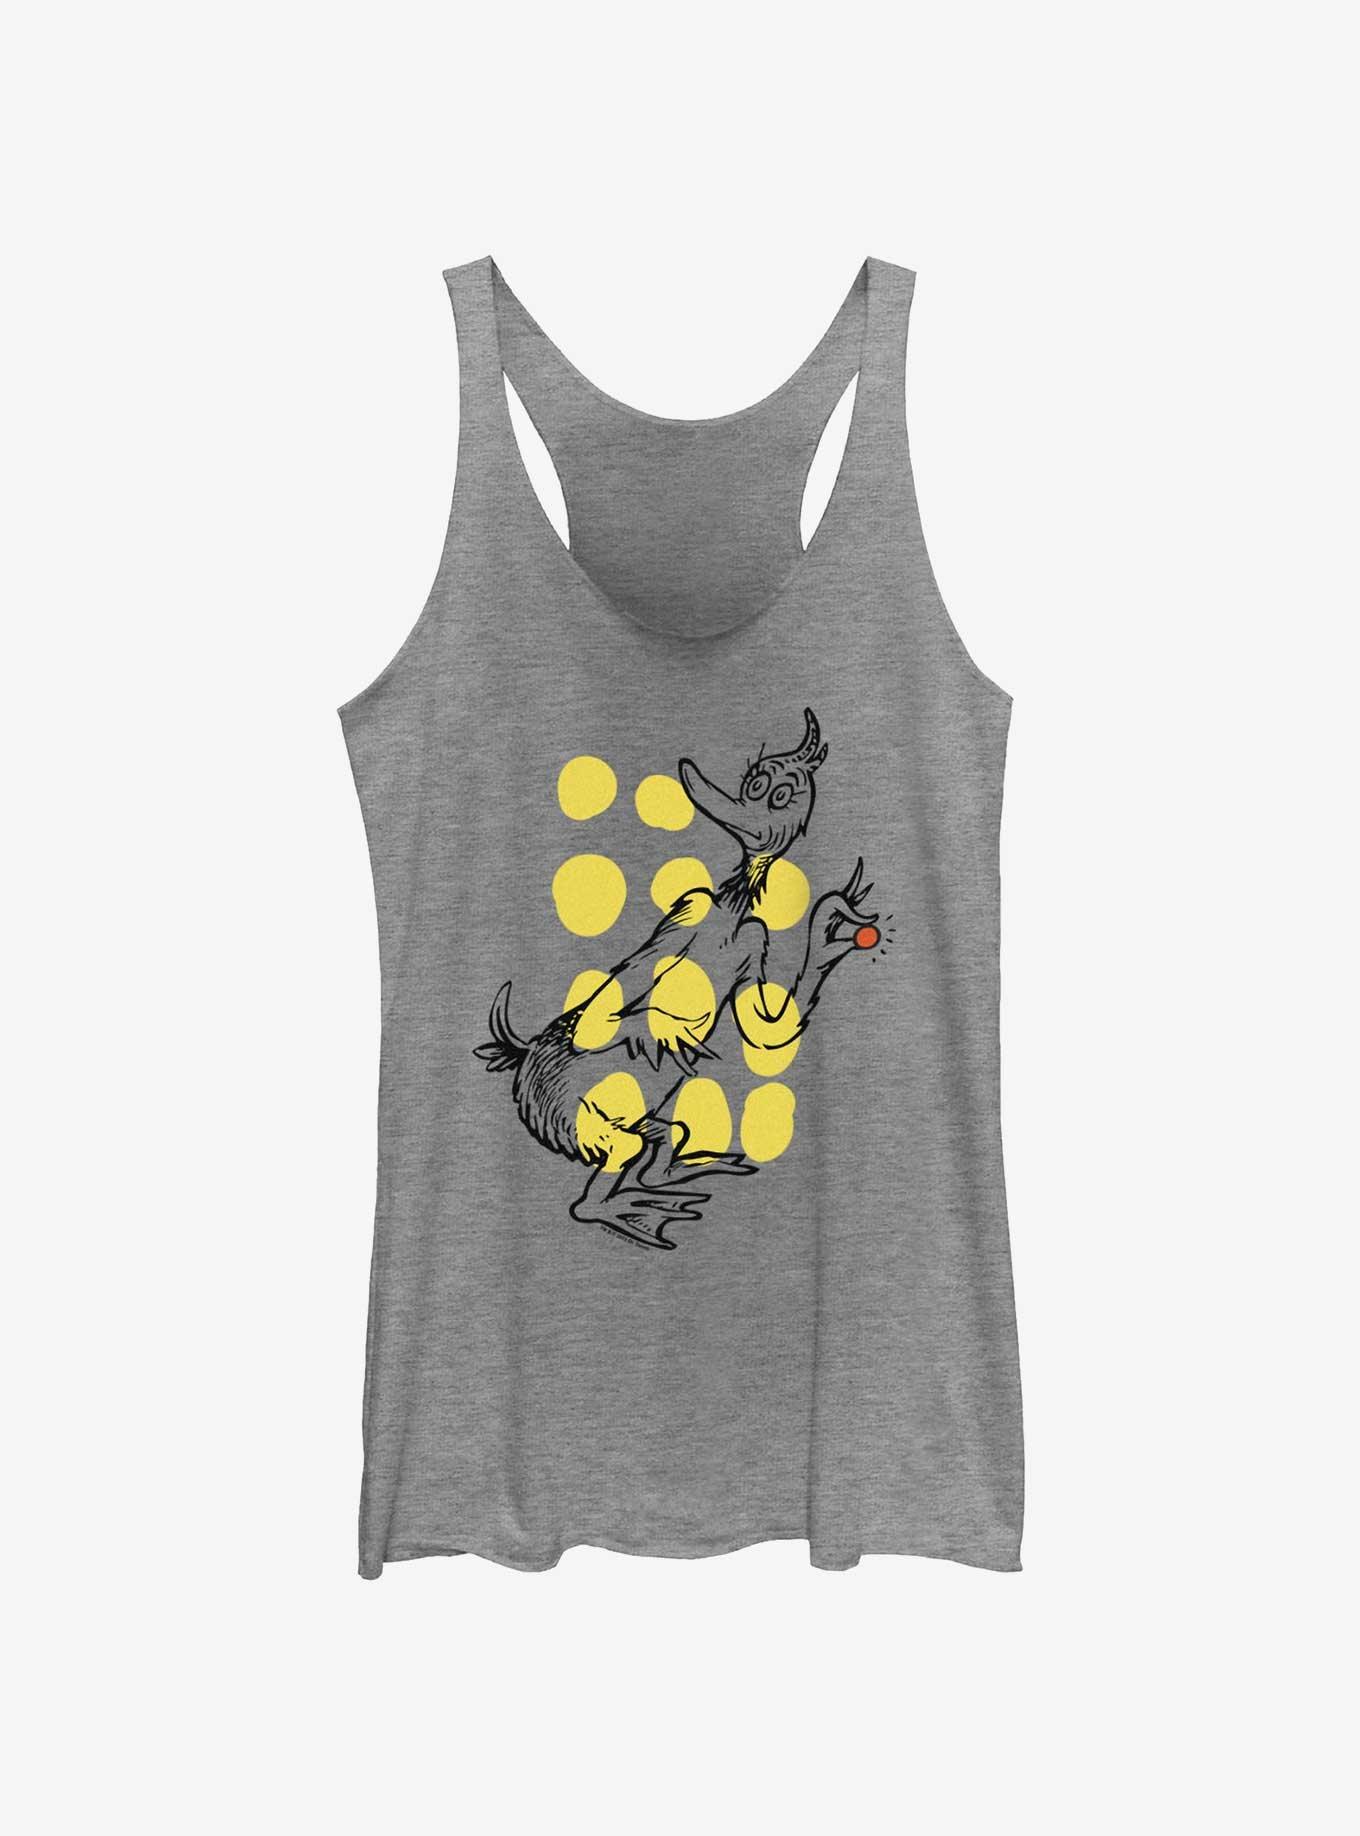 Dr. Seuss's The Bippolo Seed & Other Lost Stories Mccluck And Bippolo Seed Womens Tank Top, GRAY HTR, hi-res